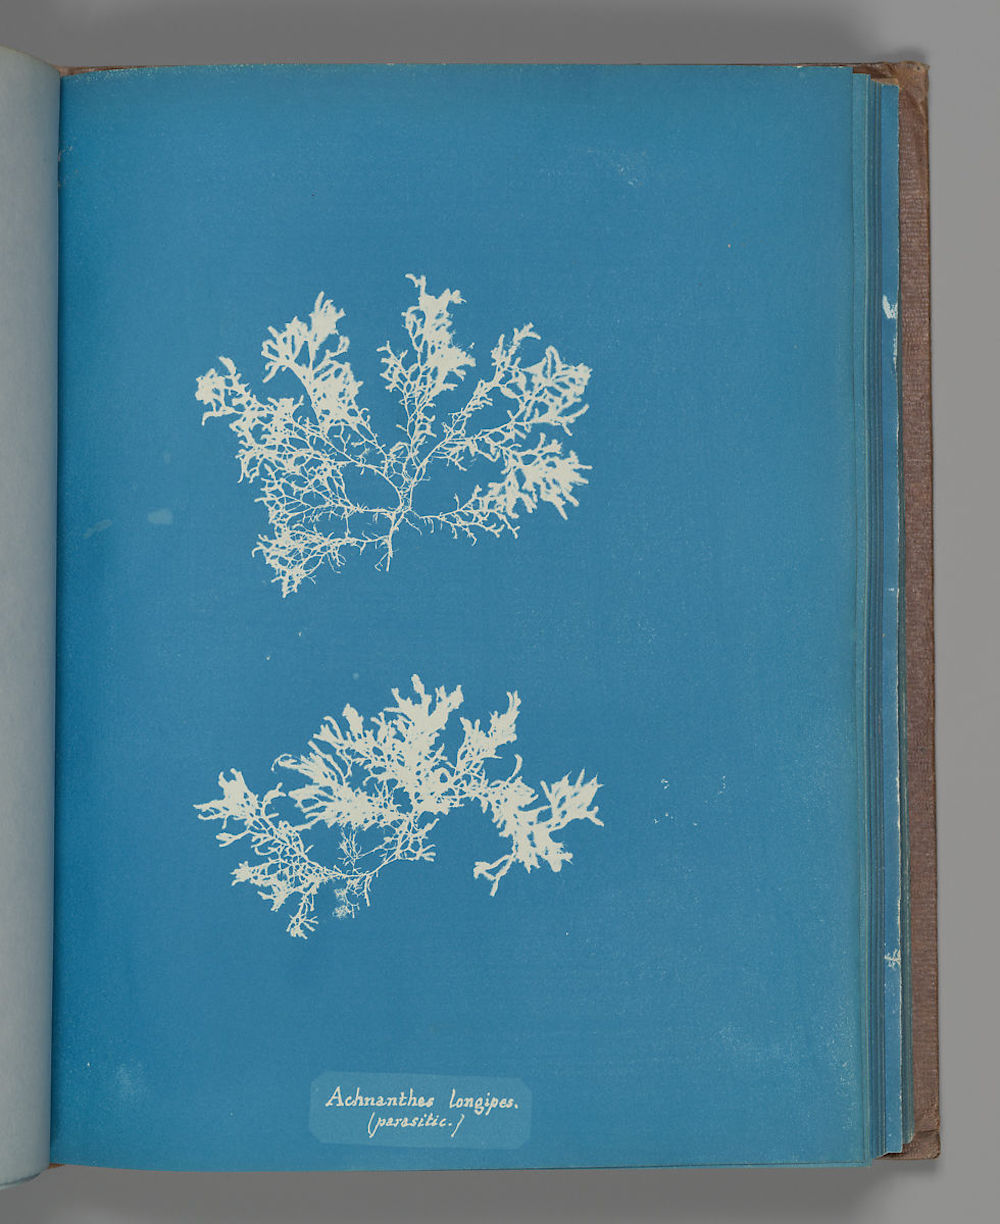 Achnanthes-longipes.-parasitic by Anna Atkins Gilman Collection, Purchase, The Horace W. Goldsmith Foundation Gift, through Joyce and Robert Menschel, 2005